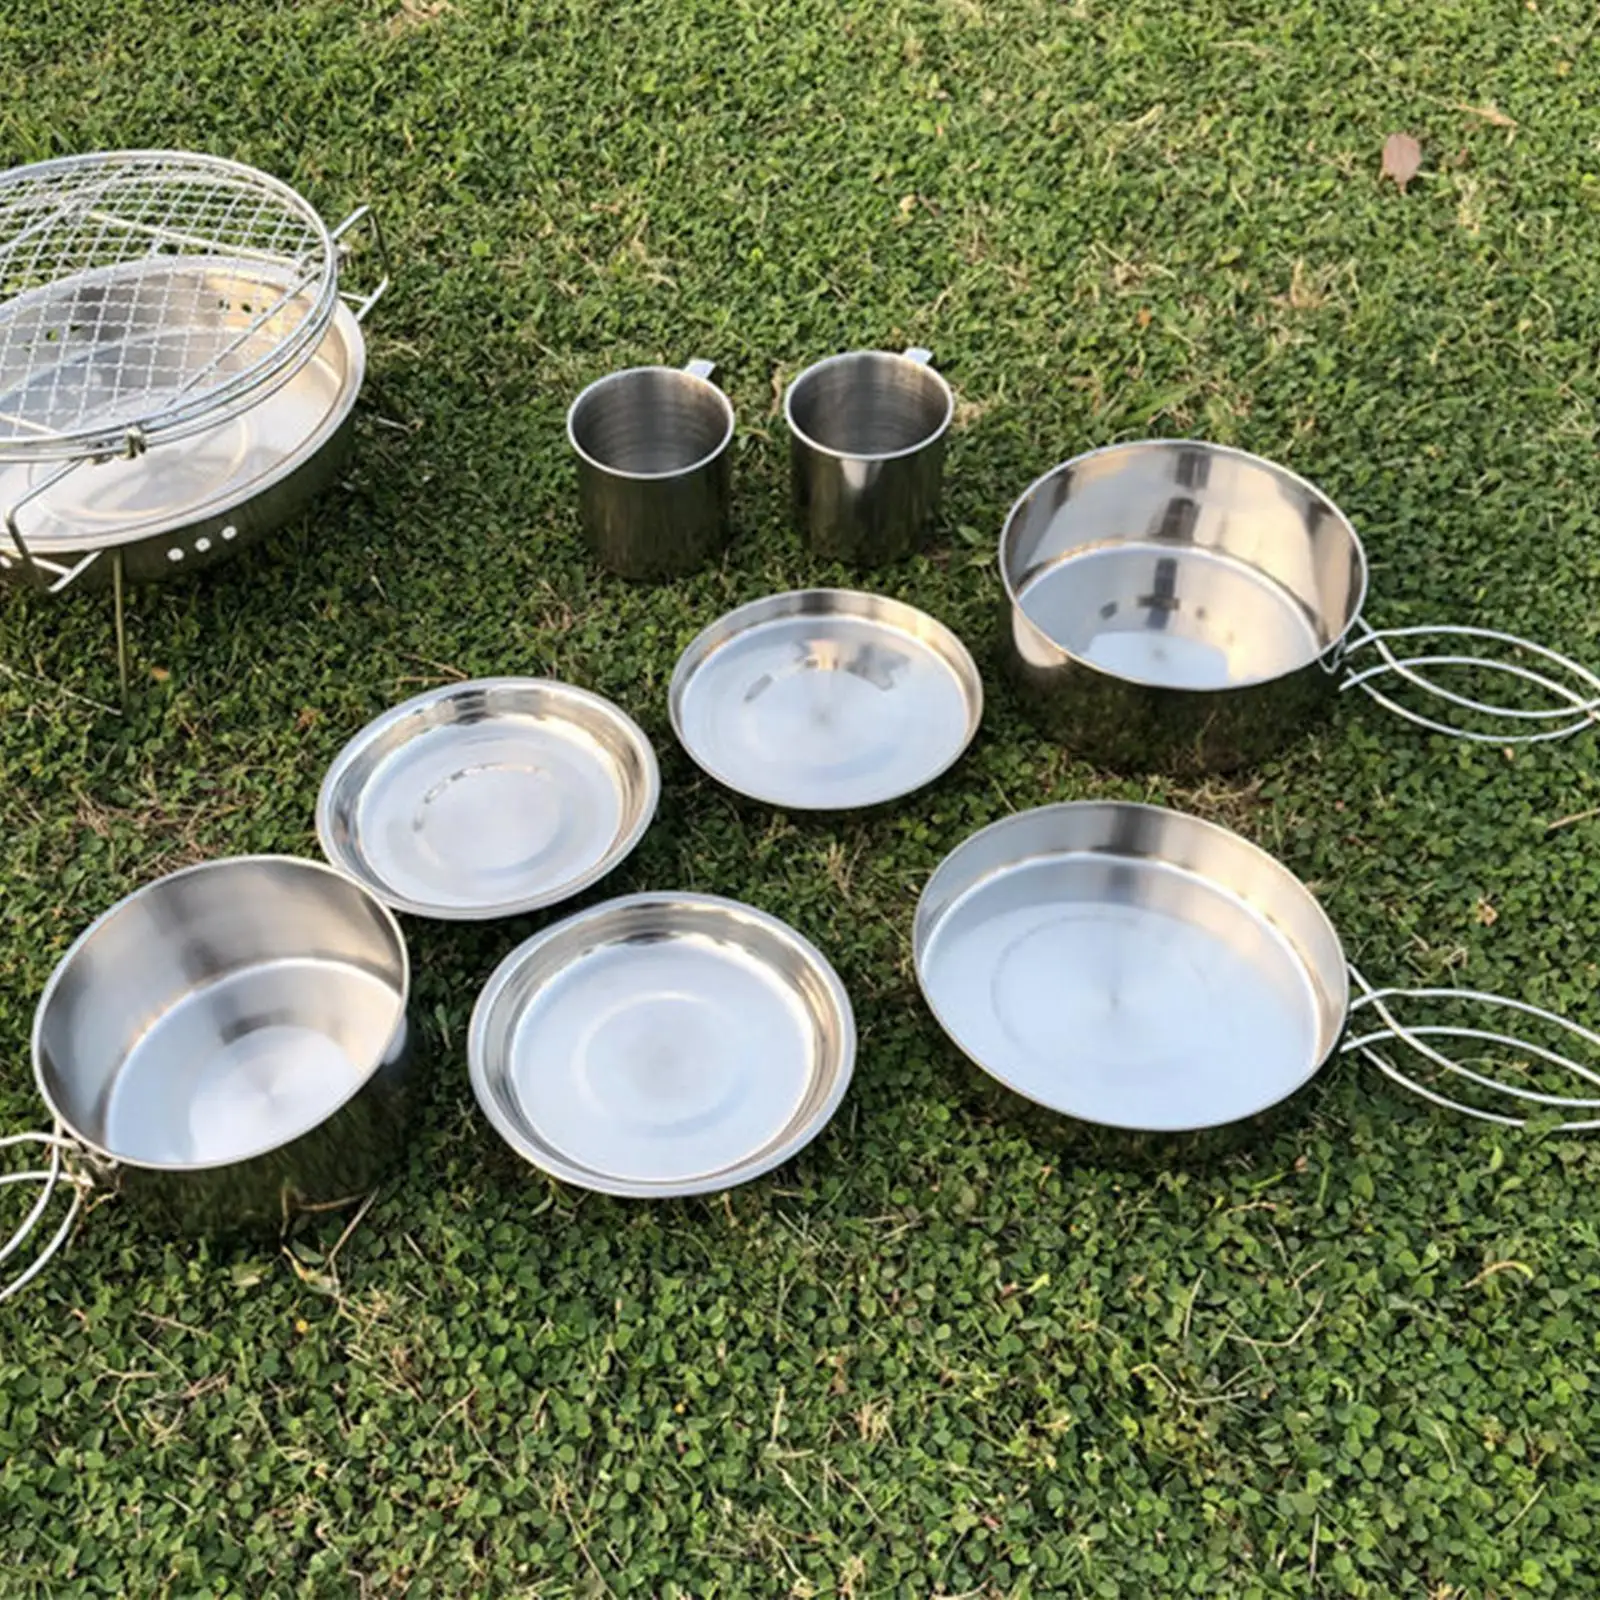 8Pcs Camping Cookware Mess Kit Tableware Fishing Outdoor Pot Plates and Cups